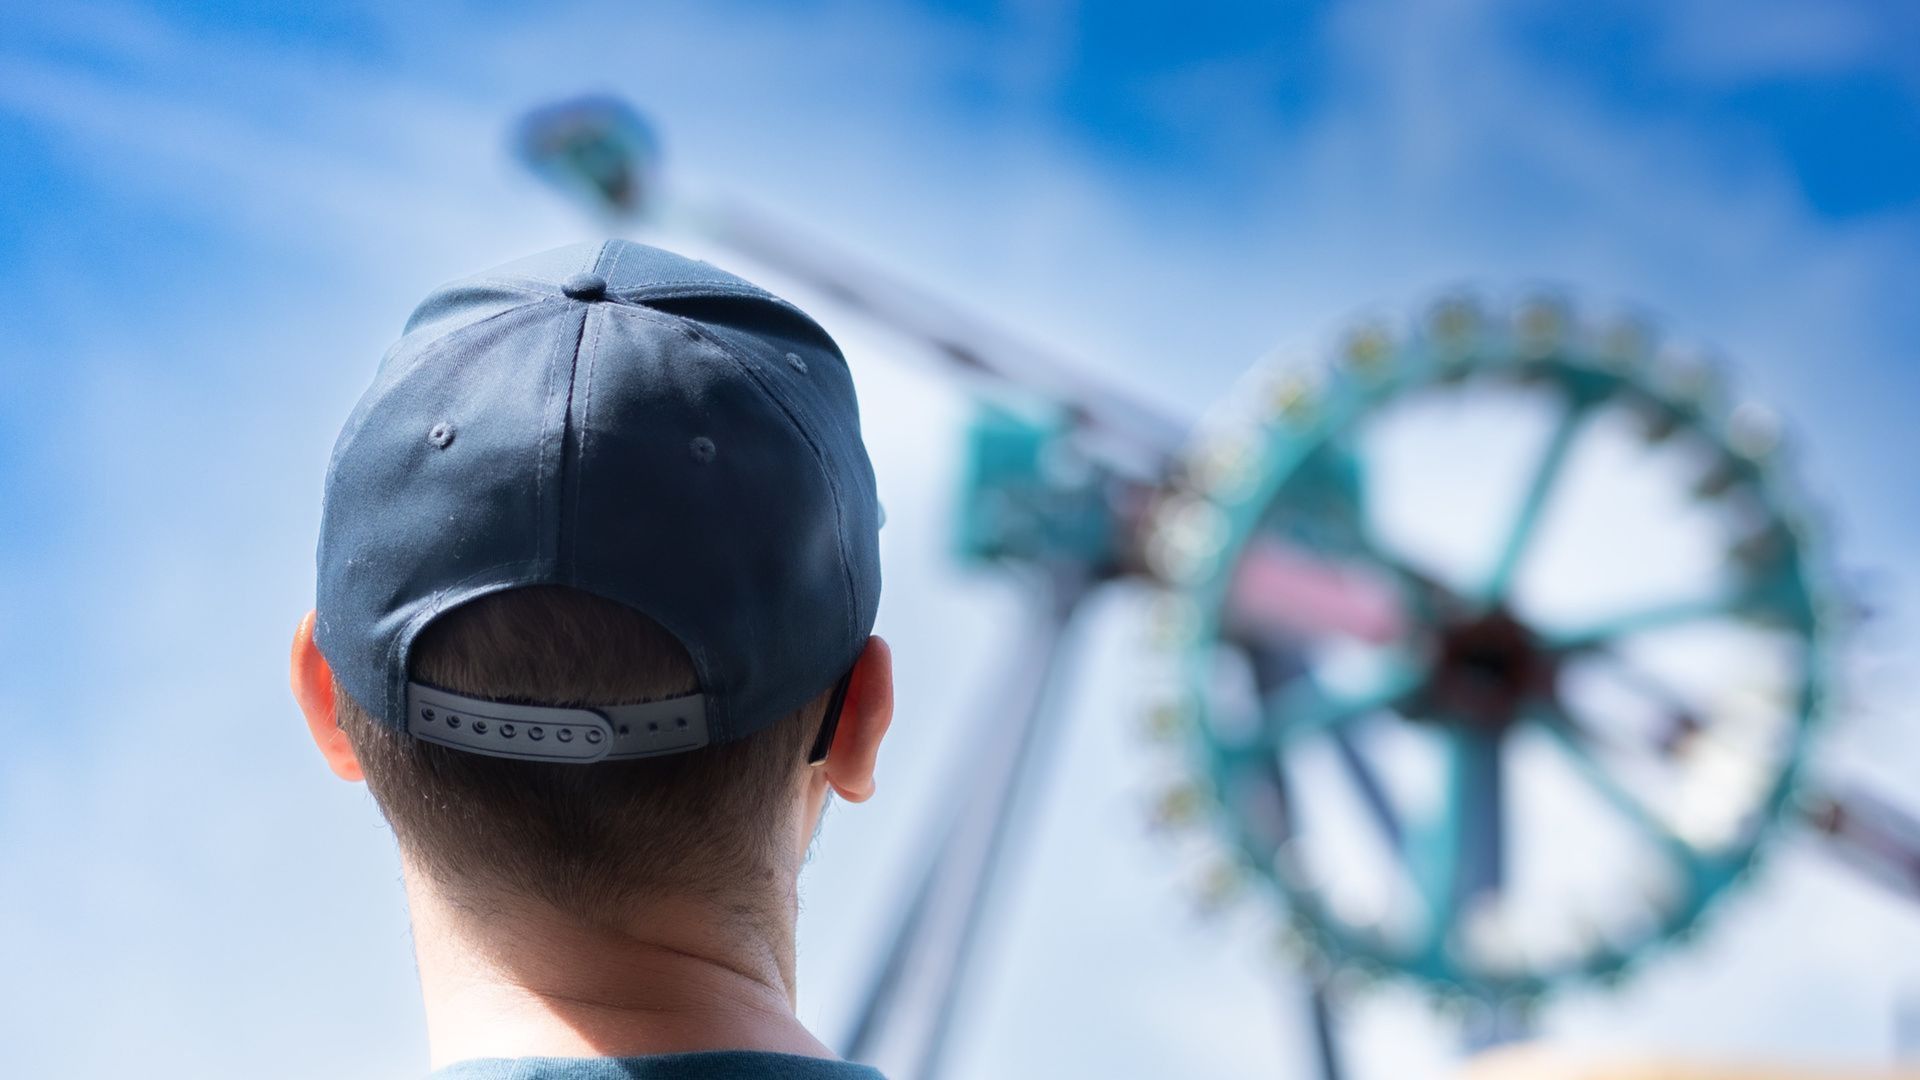 Get your learning hats on and join us as we explore the science behind some popular amusement park 